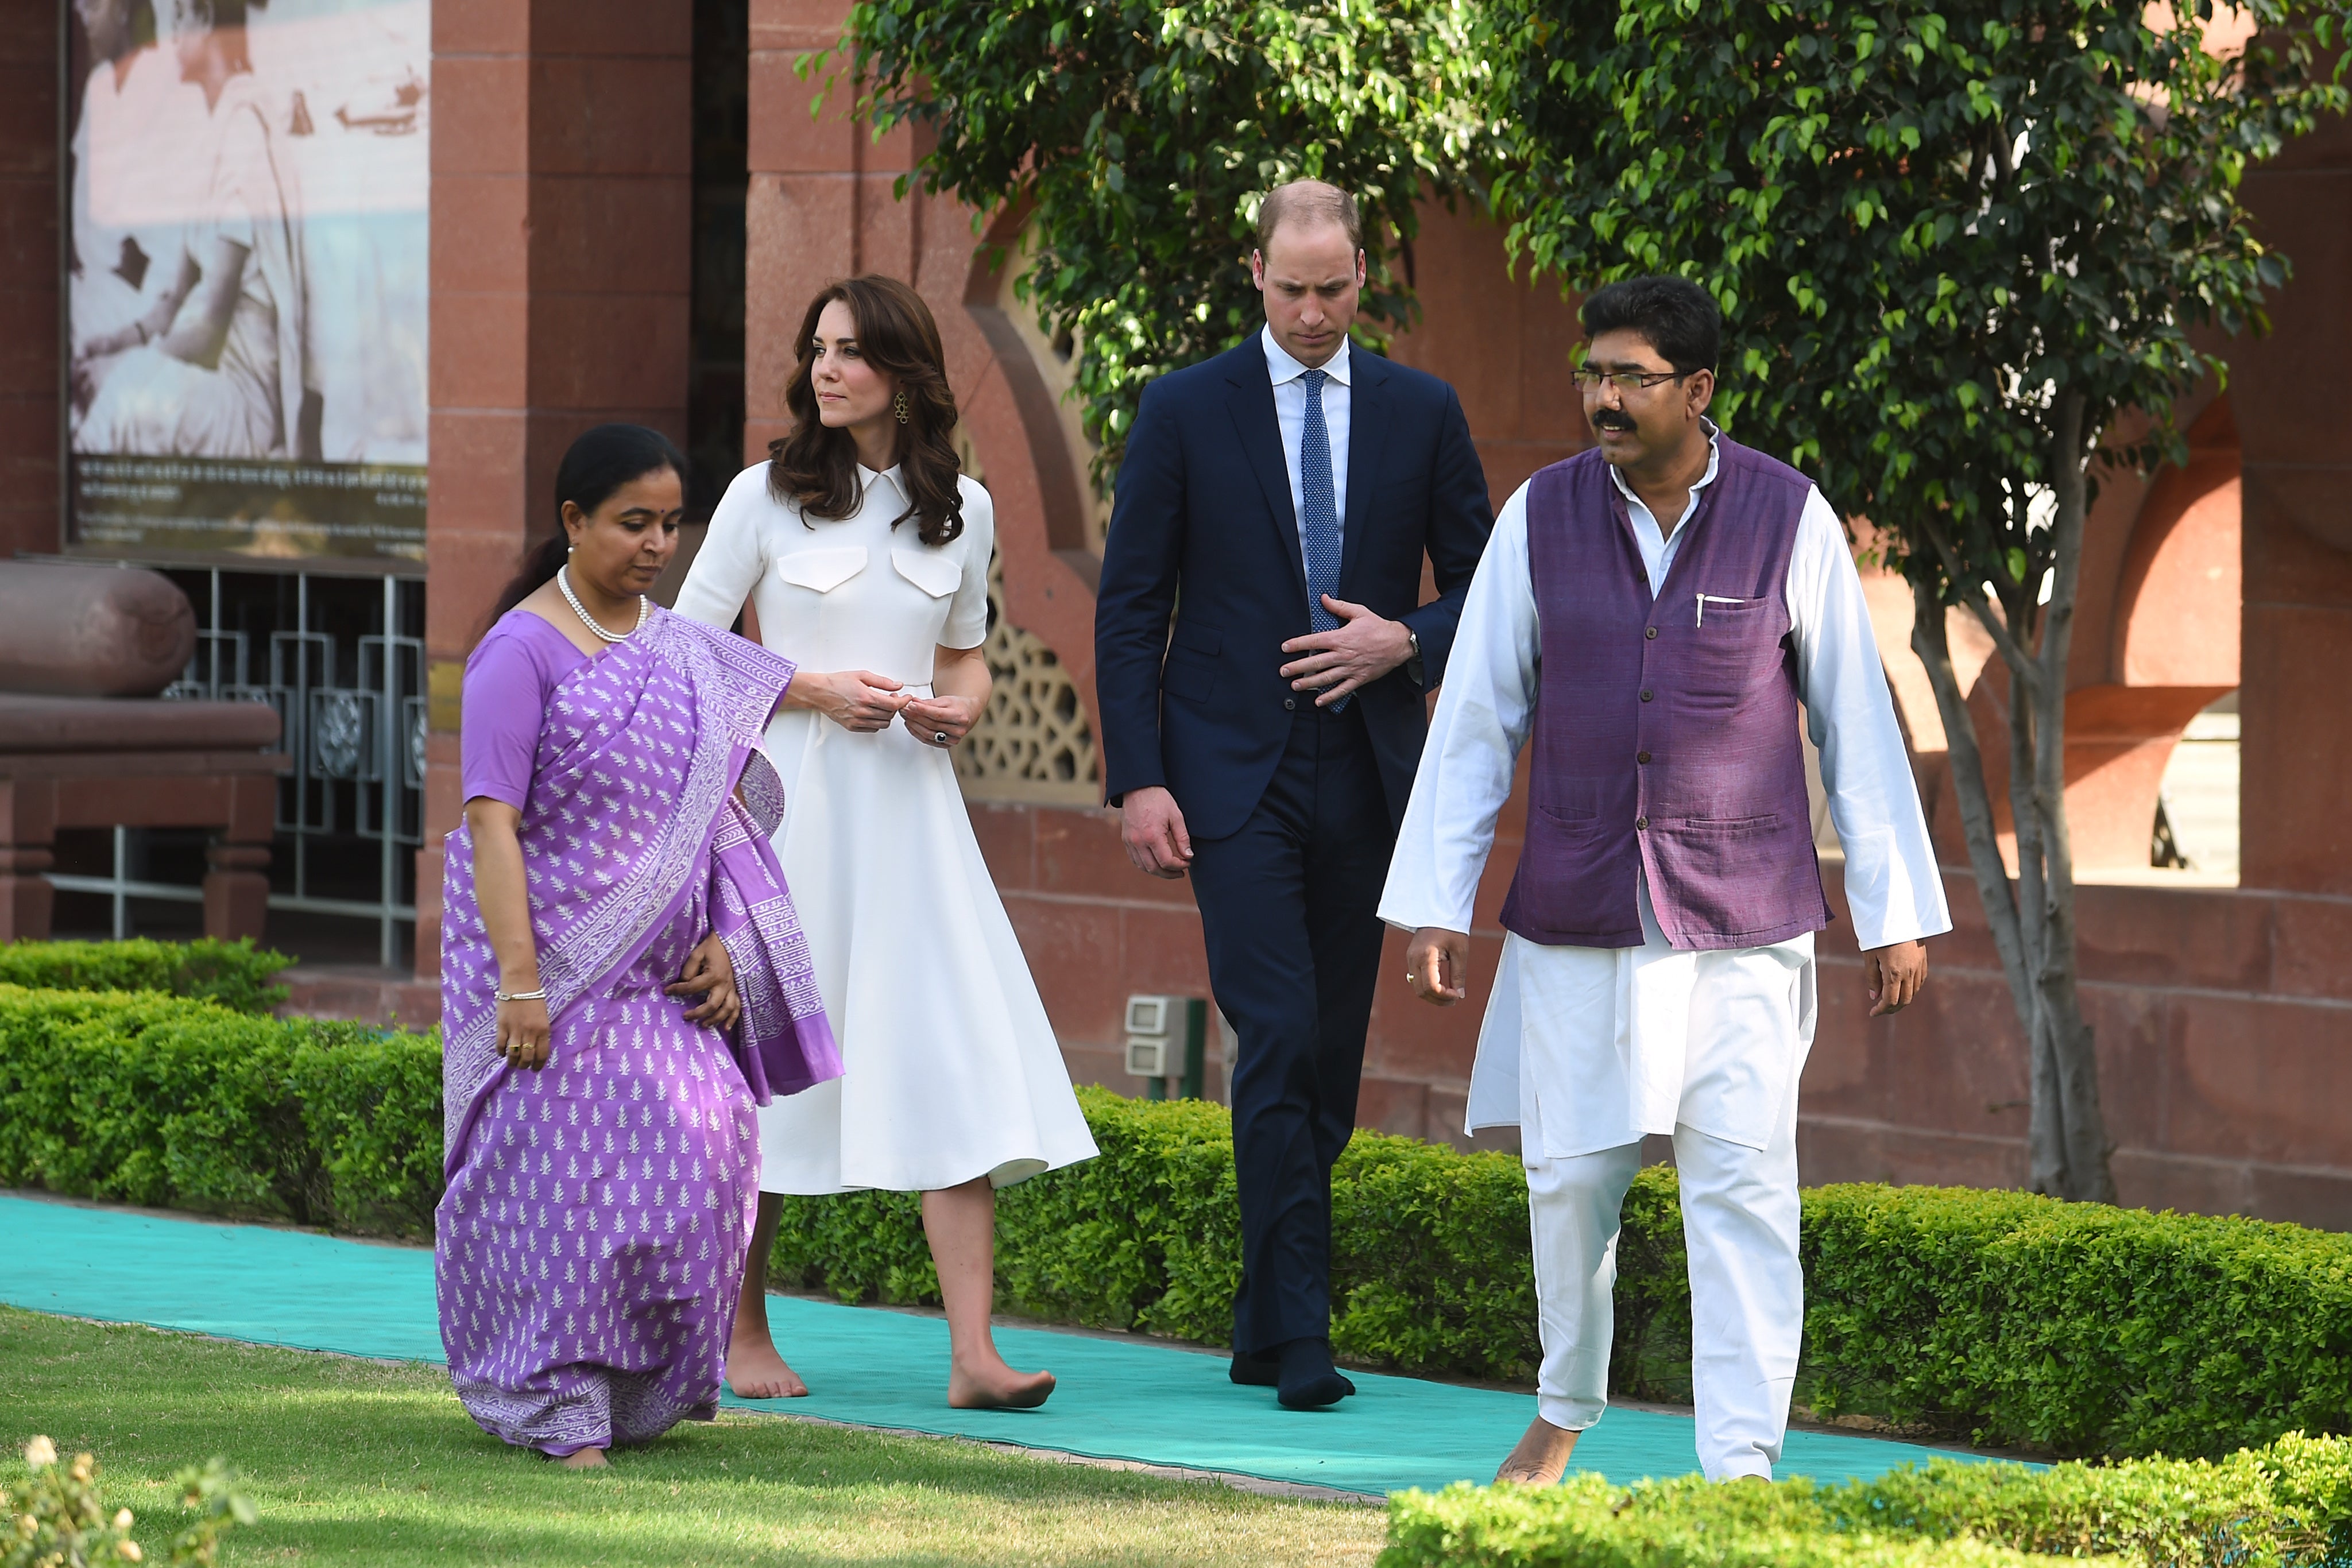 Catherine, Duchess of Cambridge and Prince William, Duke of Cambridge walk barefoot paying their respects at Gandhi Smriti, a museum located in Old Birla House, where Mahatma Gandhi, India's founding father, spent the last few years of his life, on April 11, 2016